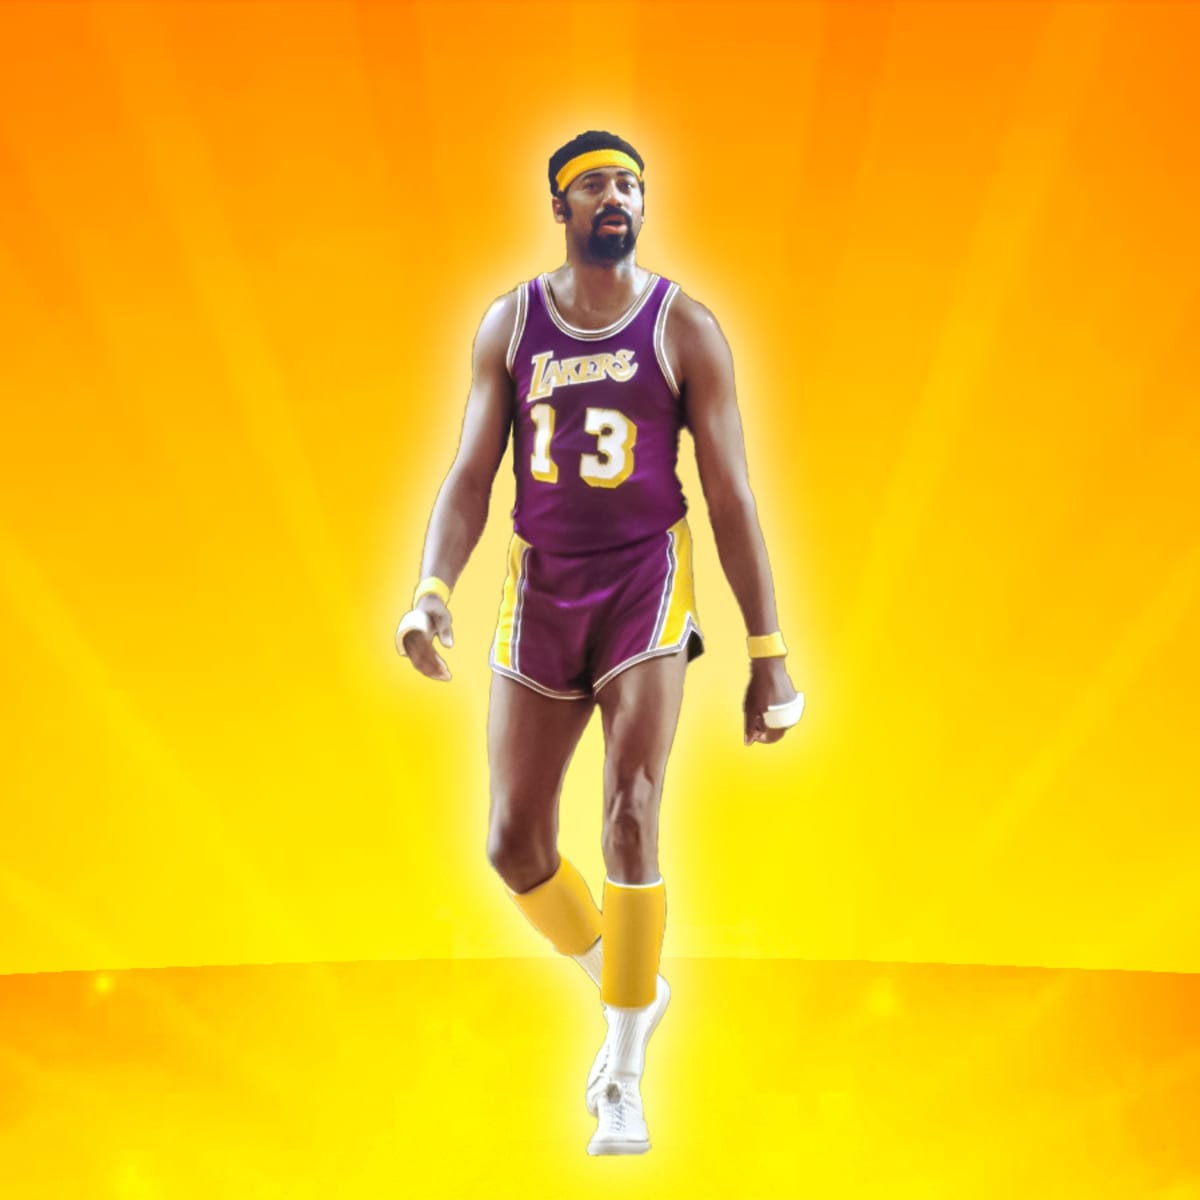 Wilt Chamberlain Made $65,000 Before He Was Even Allowed to Play in the NBA